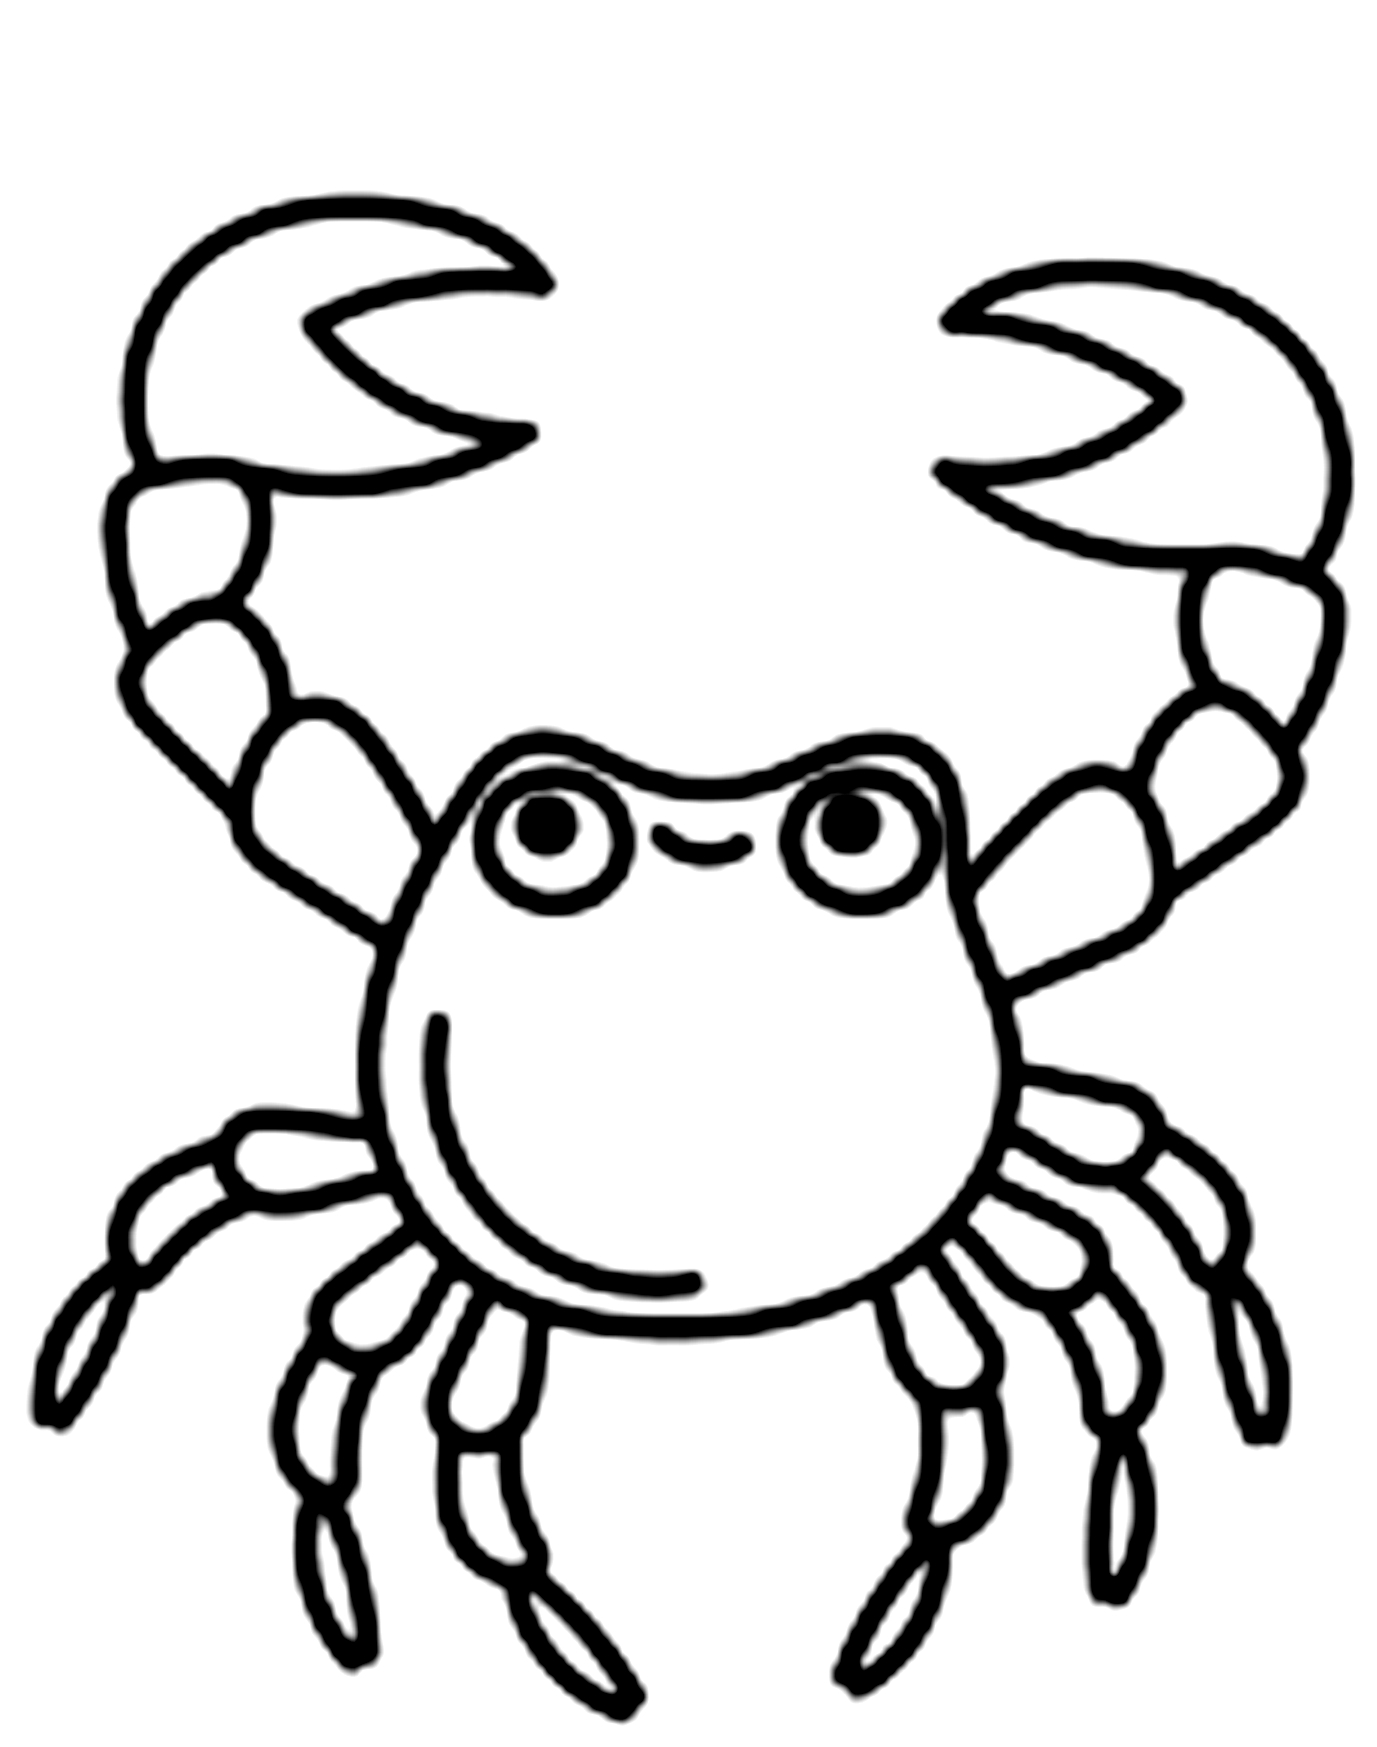 Drawing 22 from Shellfish coloring page to print and coloring